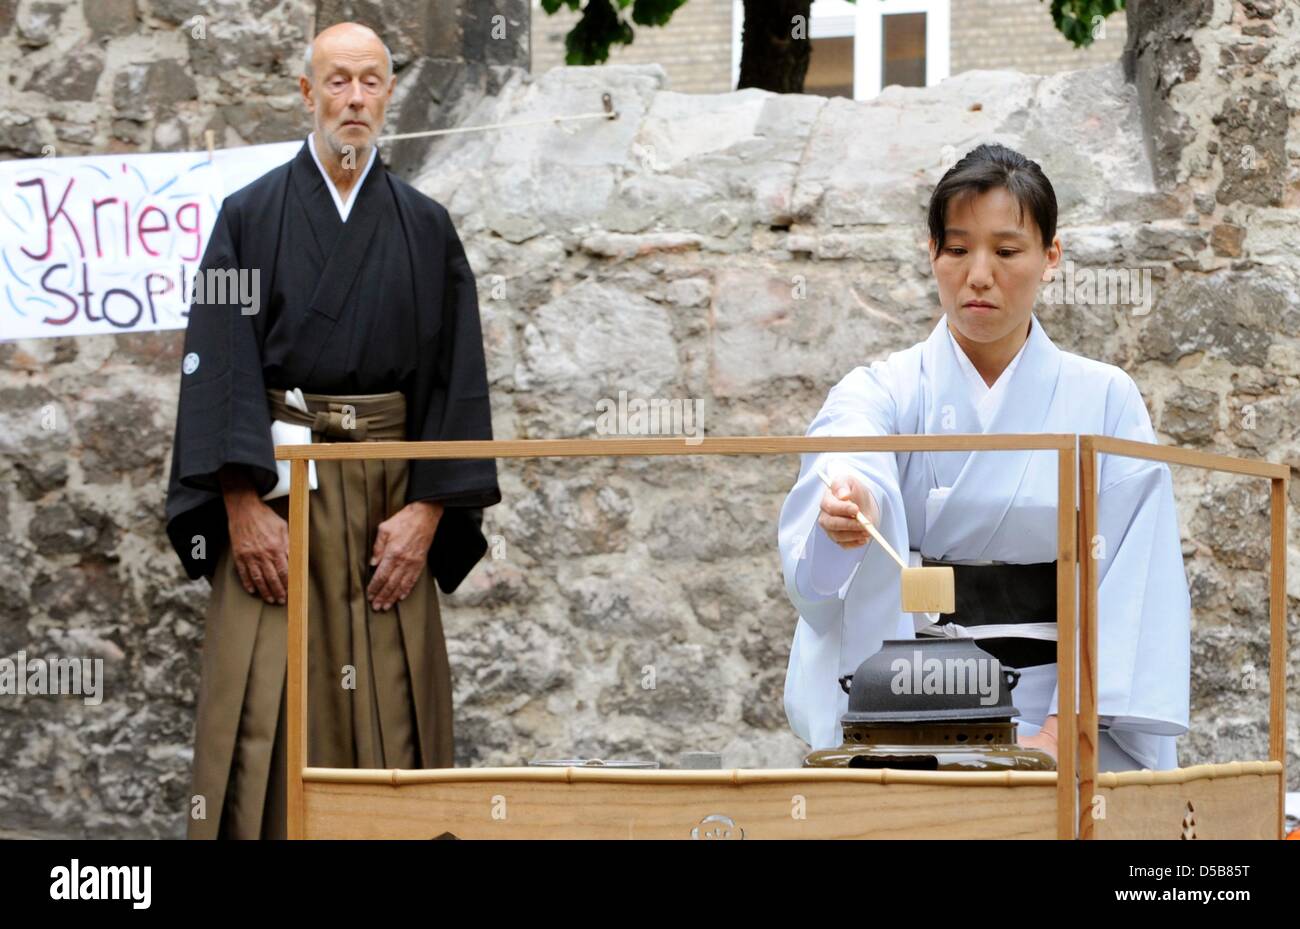 A tea ceremony is performed by the Ueda-tea master Hiroyo Nakamoto in commemoratin of Hiroshima at the memorial of the Aegidien church in Hannover, Germany, 6 August 2010. For the 65. anniversary of the atomic bombing of Hiroshima, peace-groups in Germany asked for commemorations. Hannover and Hiroshima are connected by a twinning arrangement for almost three years. Photo: Holger H Stock Photo